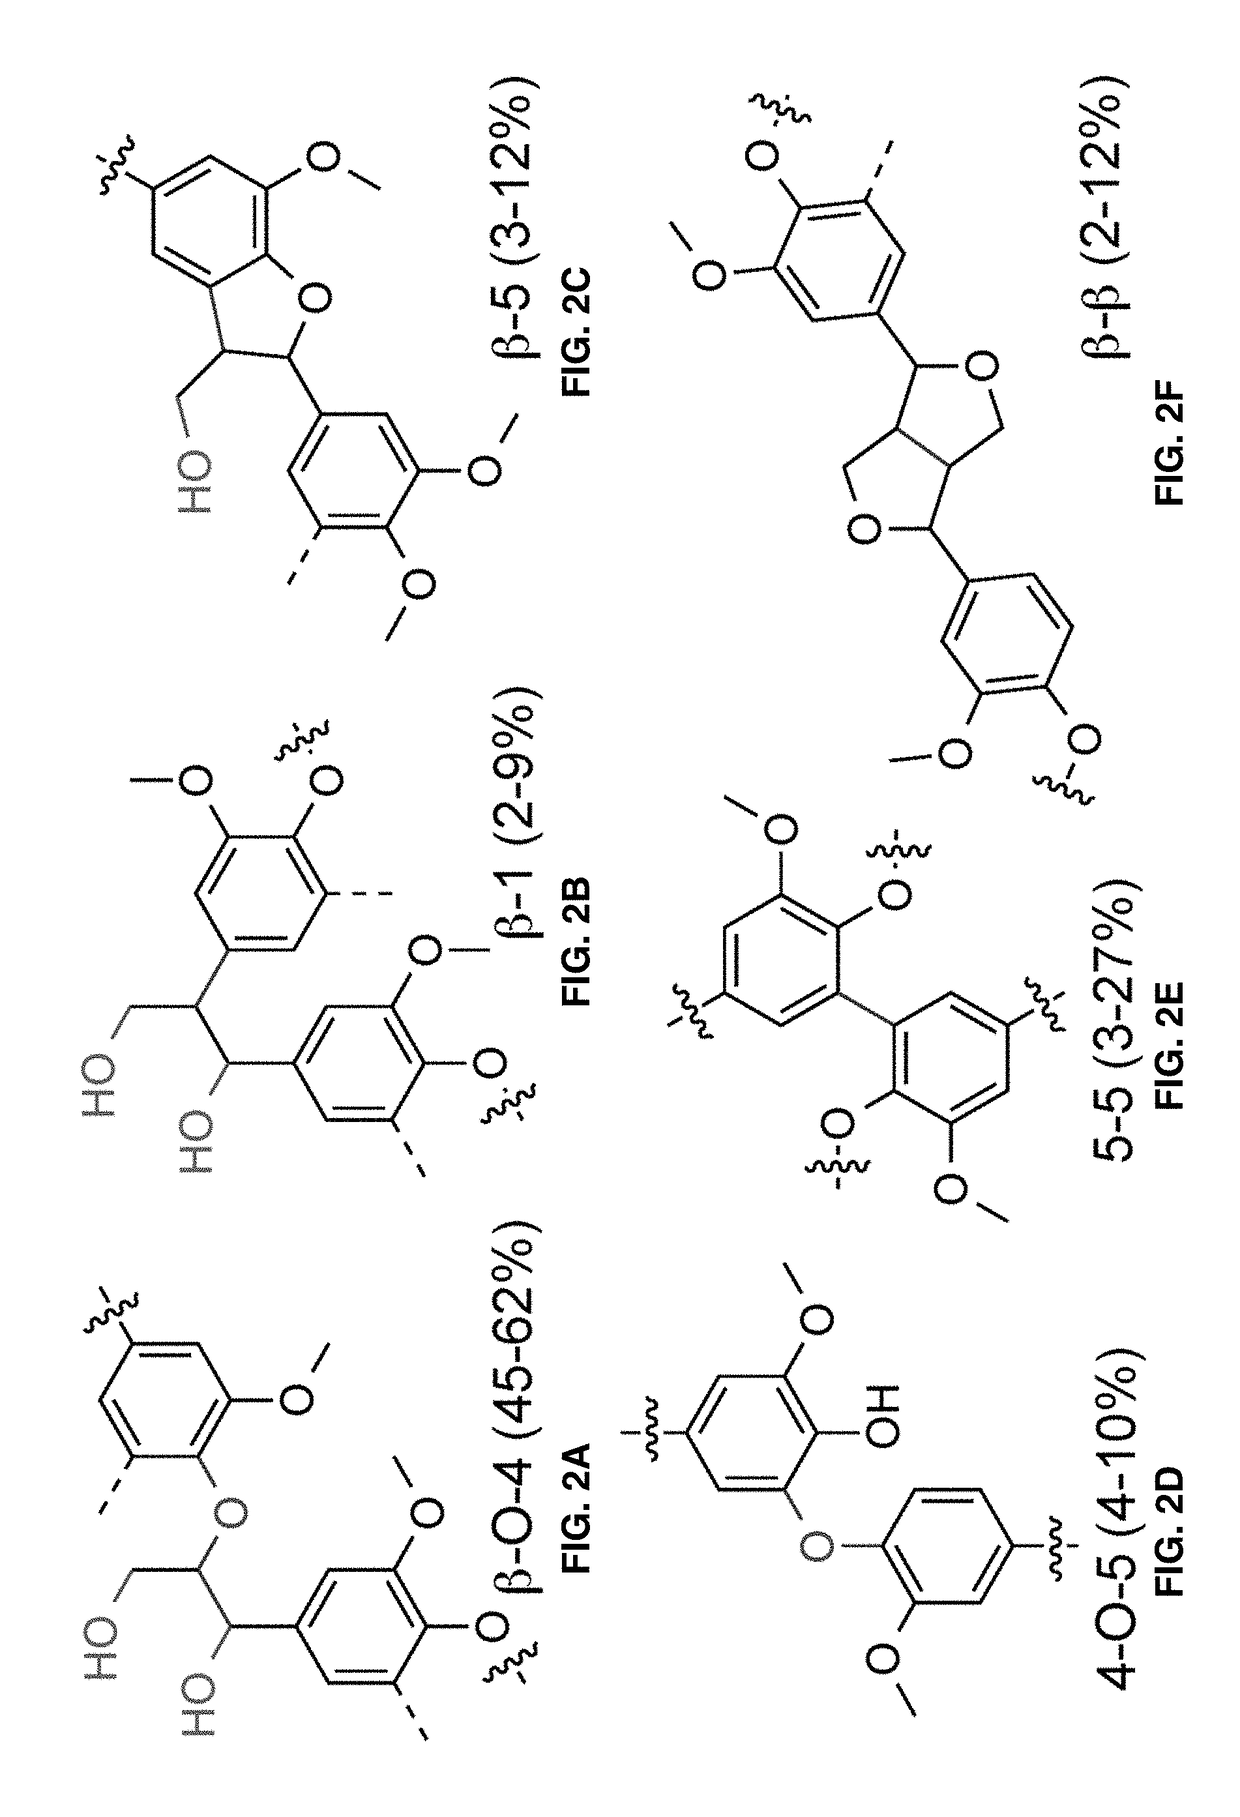 Nitroxyl-mediated oxidation of lignin and polycarboxylated products